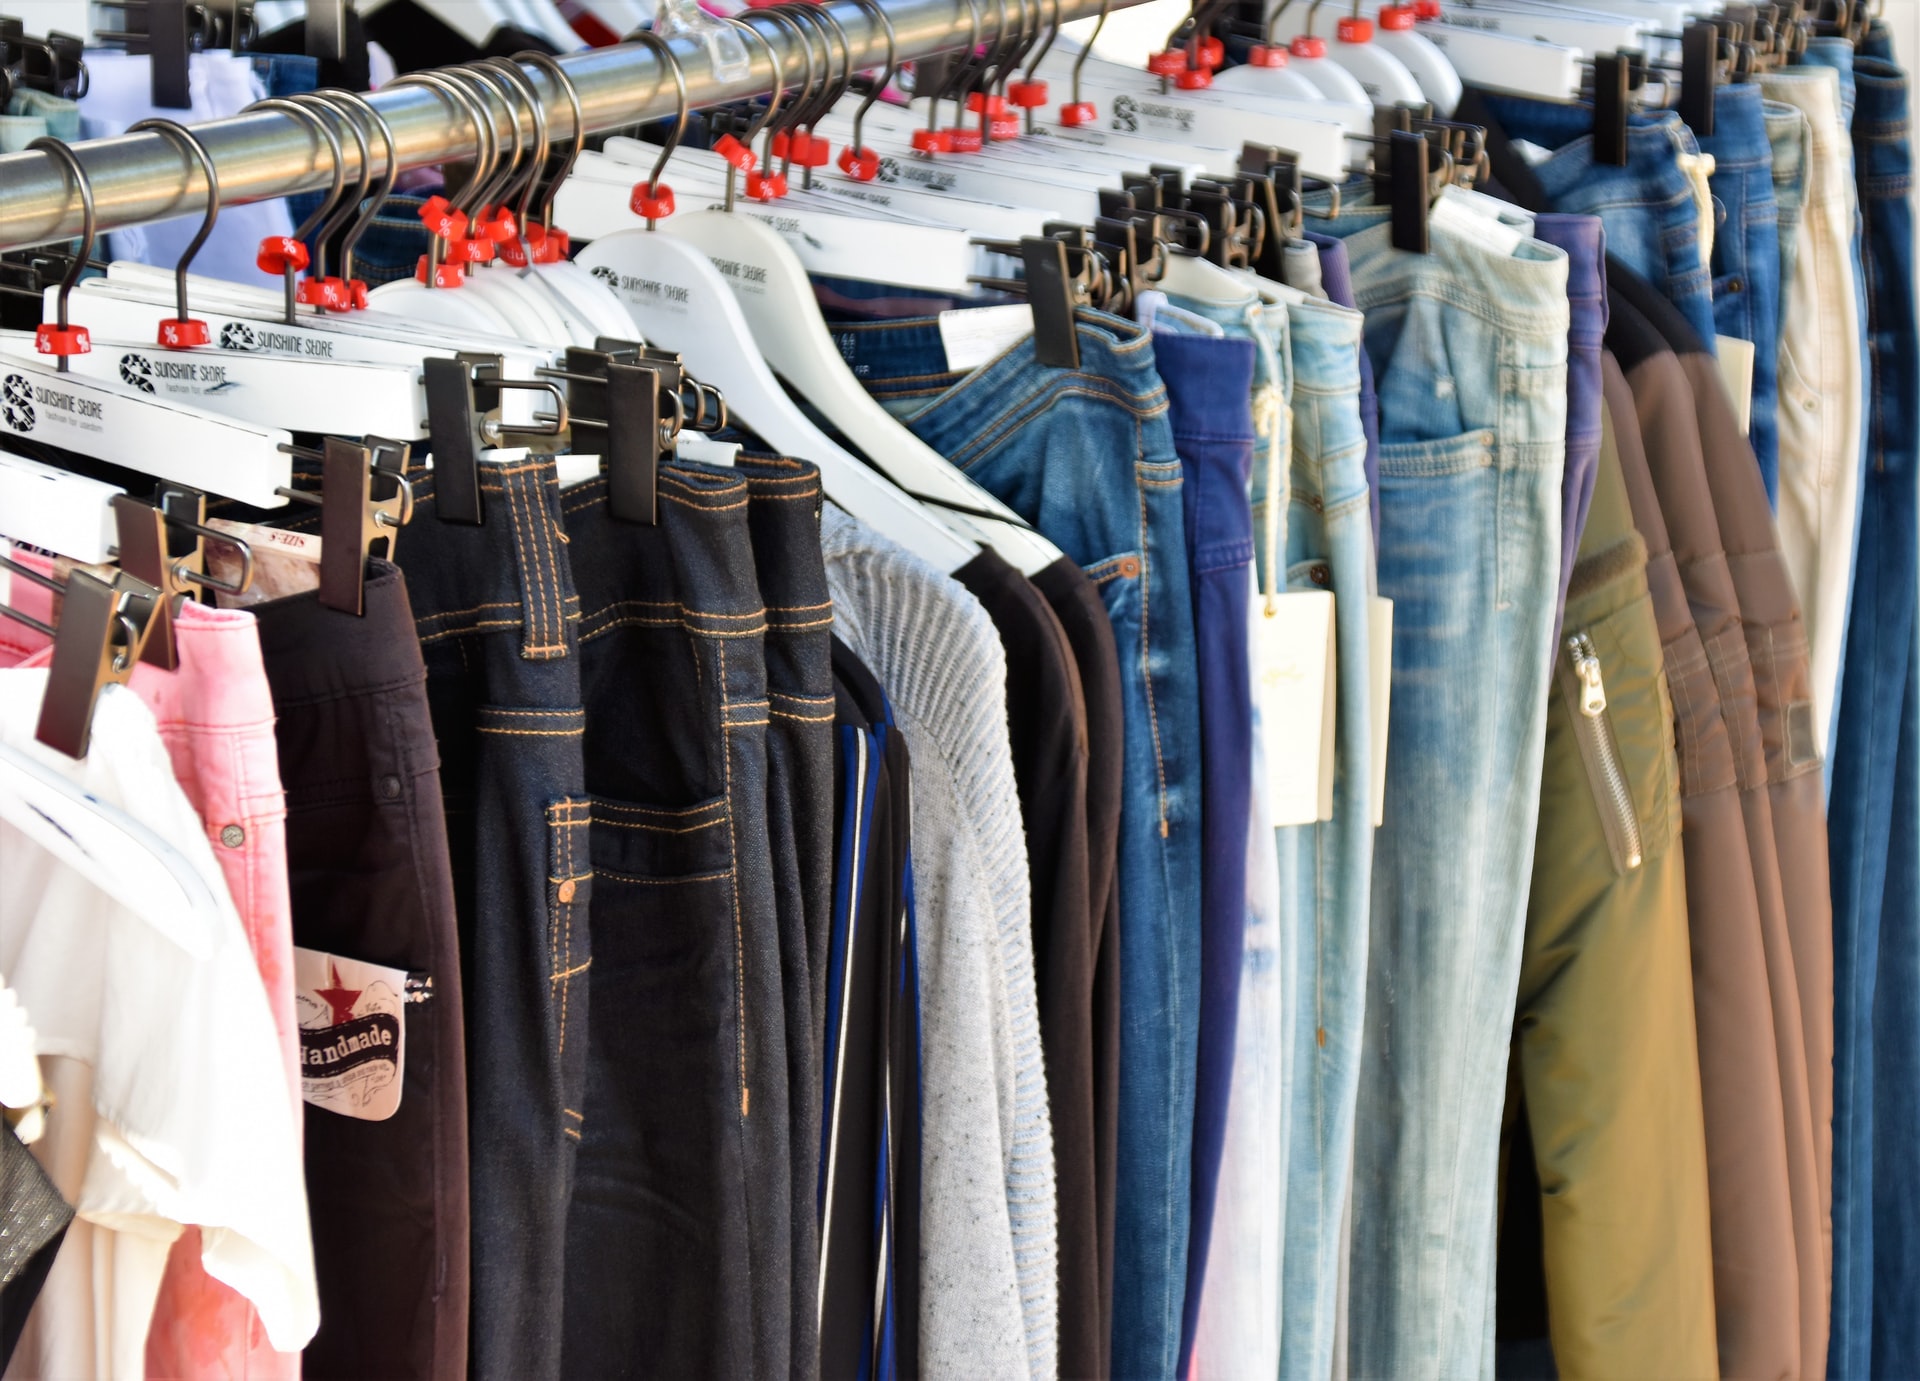 Vintage clothing and accessories you can easily find in second-hand stores